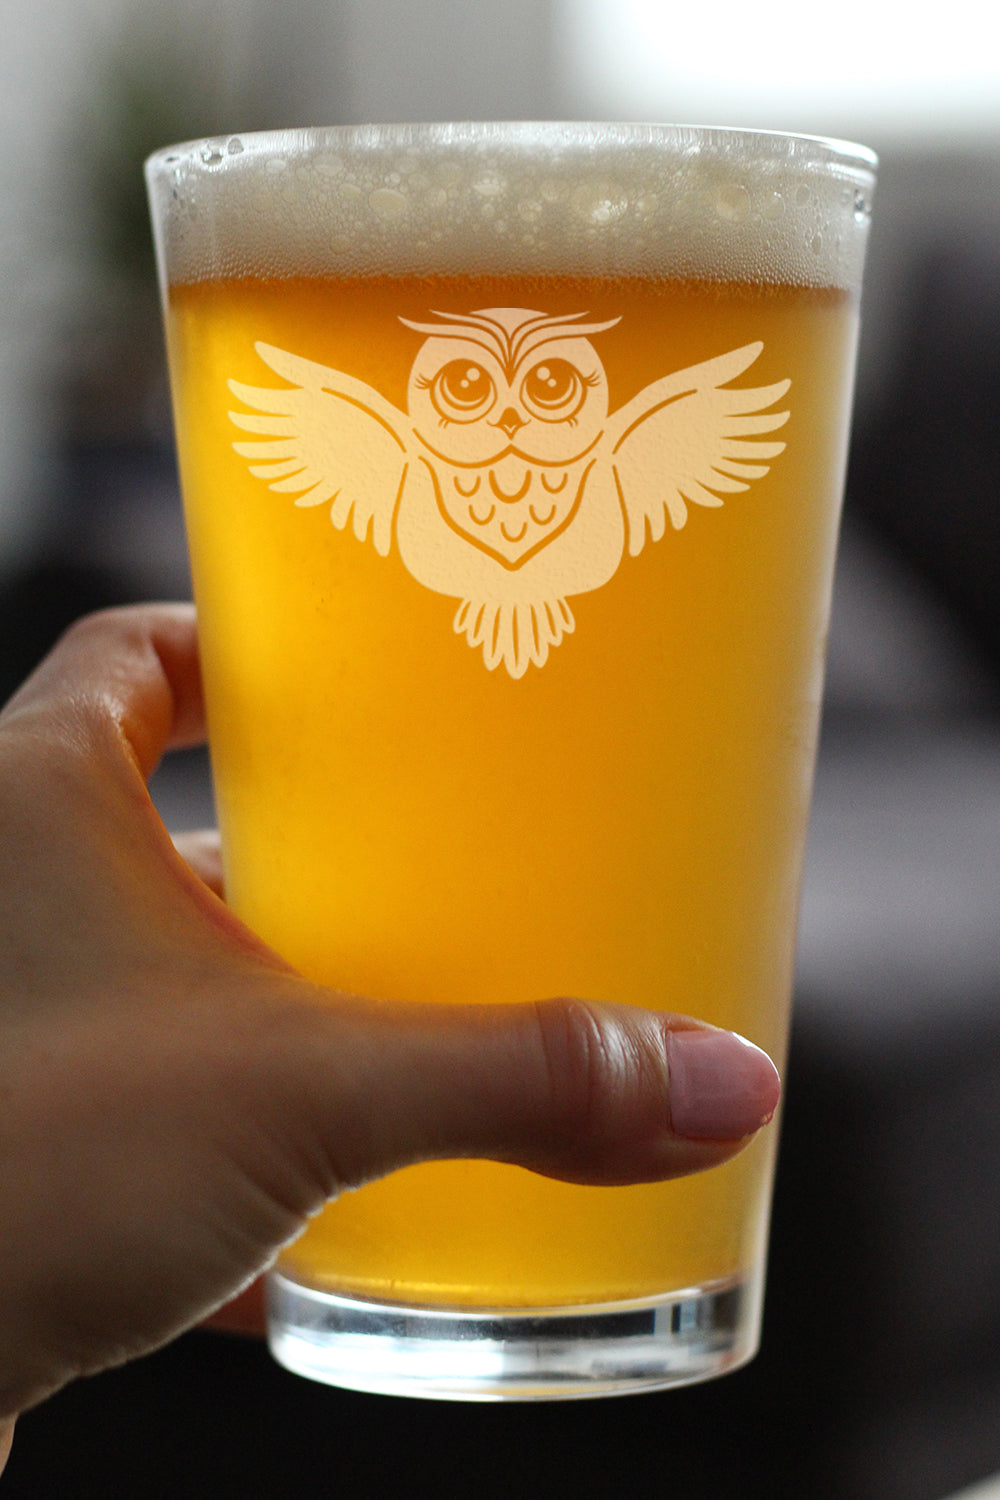 Cute Owl Pint Glass for Beer - Fun Owl Decor and Gifts for Women and Men - 16 Oz Glasses